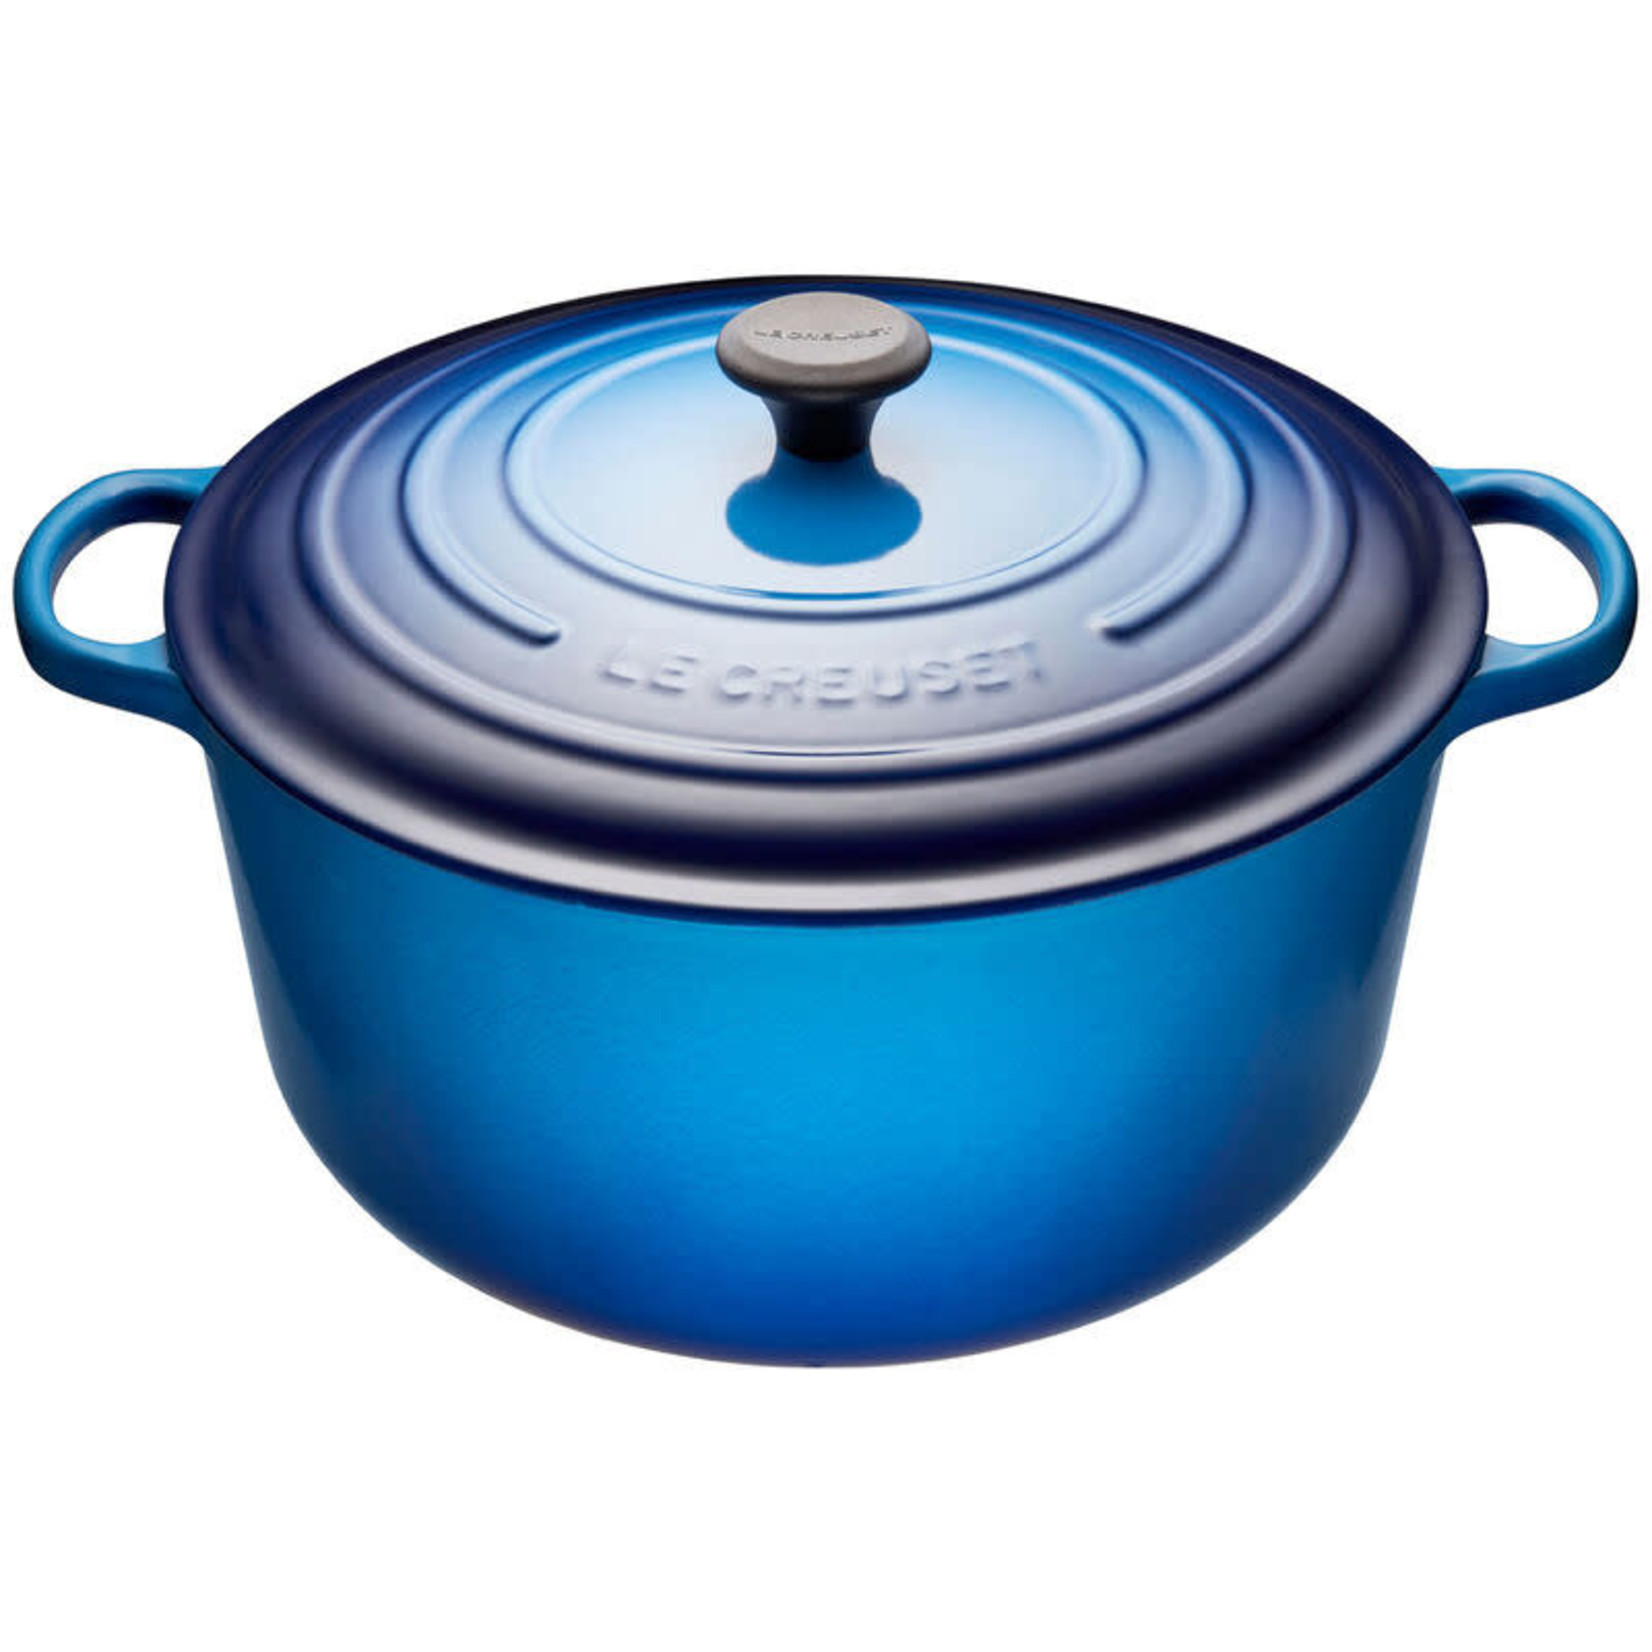 LE CREUSET LE CREUSET Round French Oven 12L